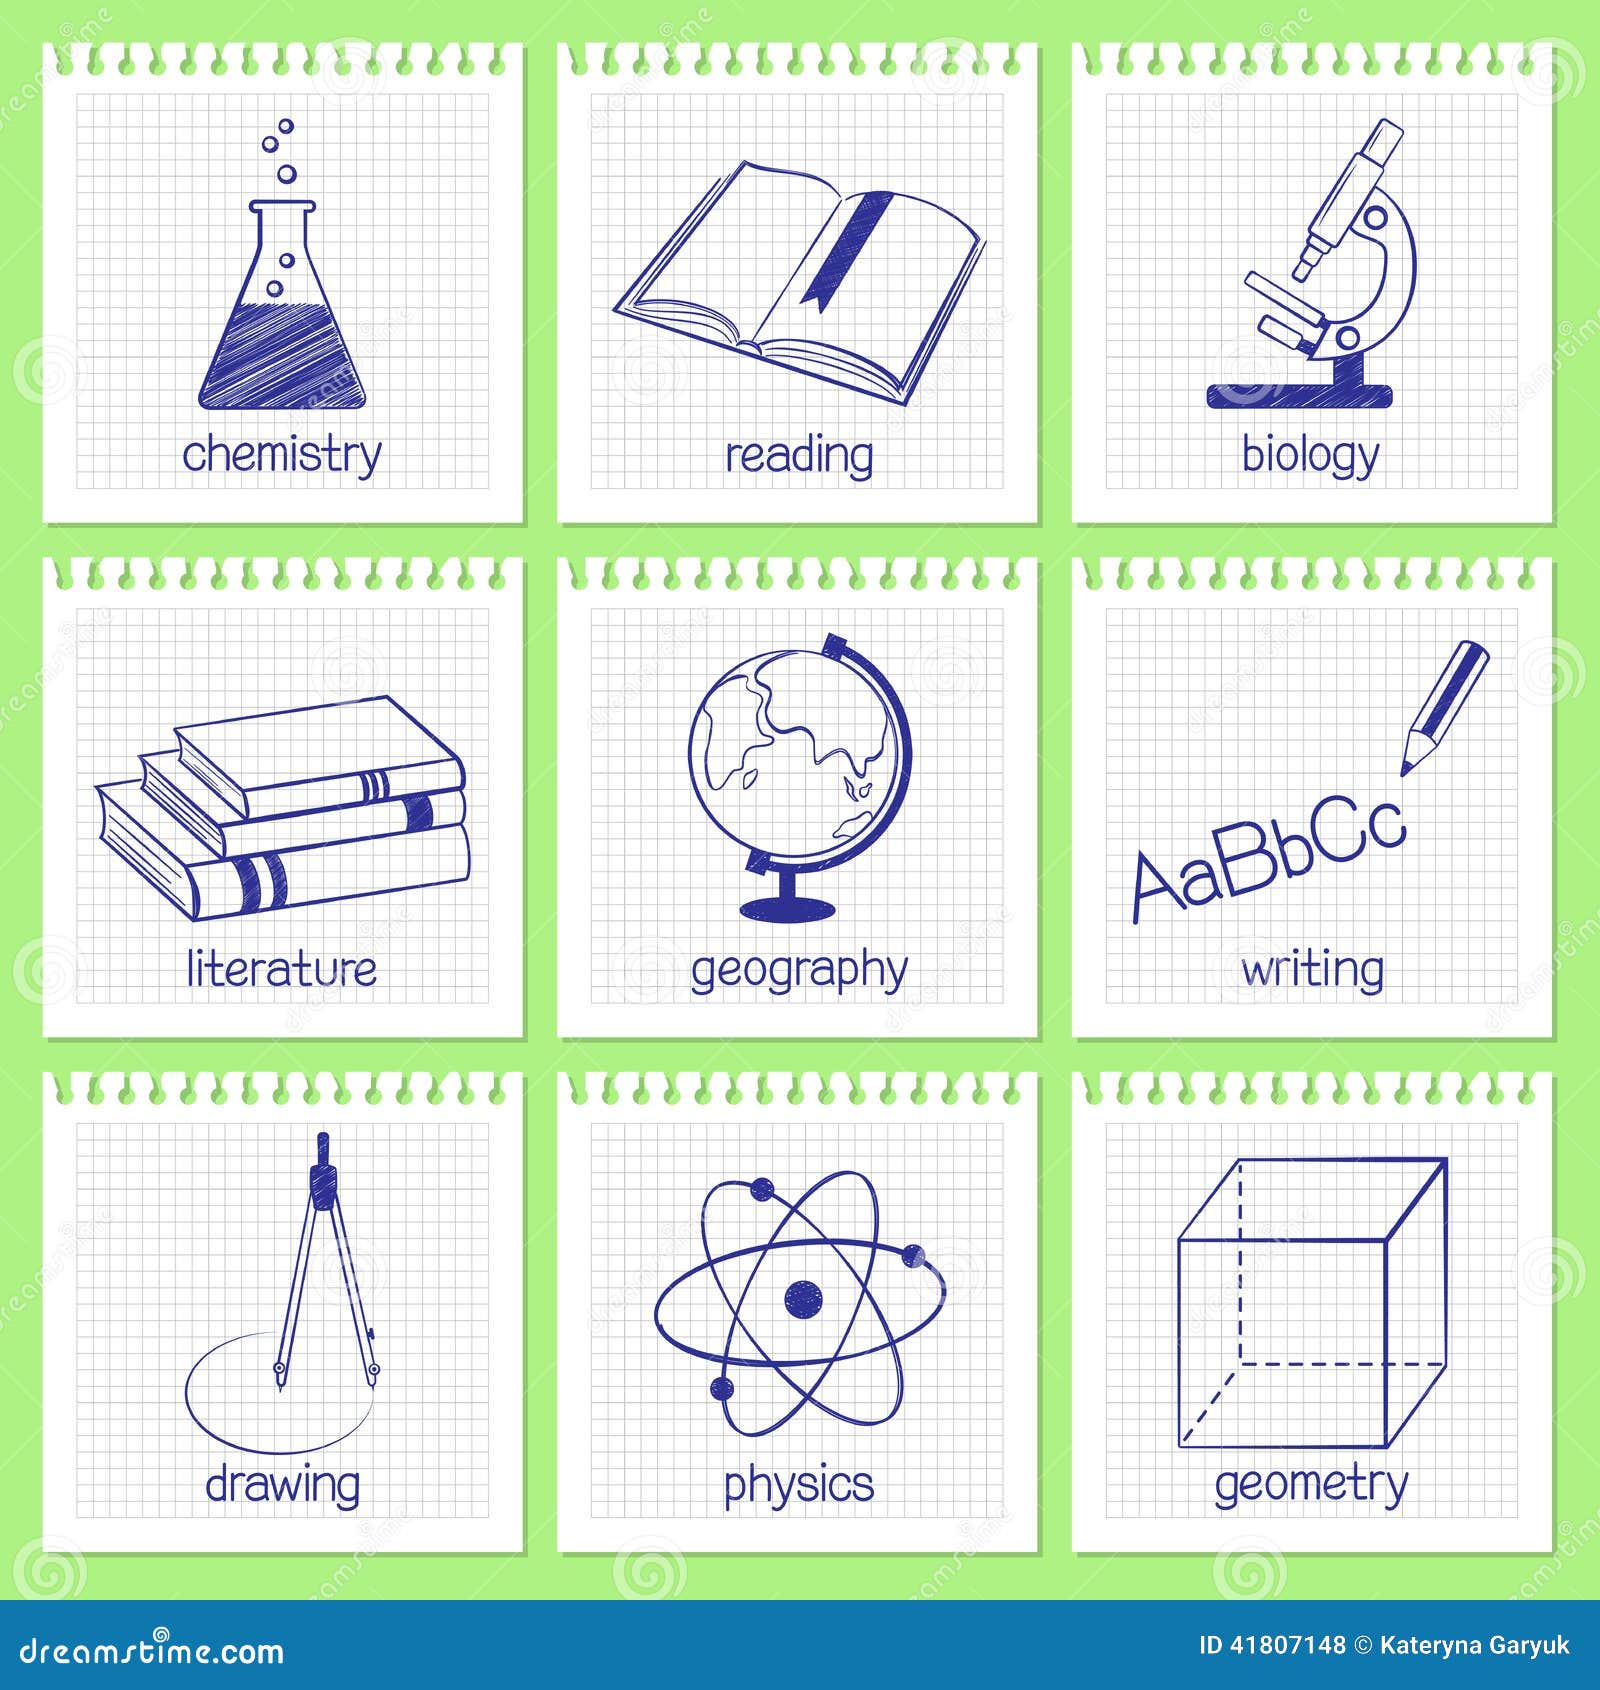 clipart for school subjects - photo #33